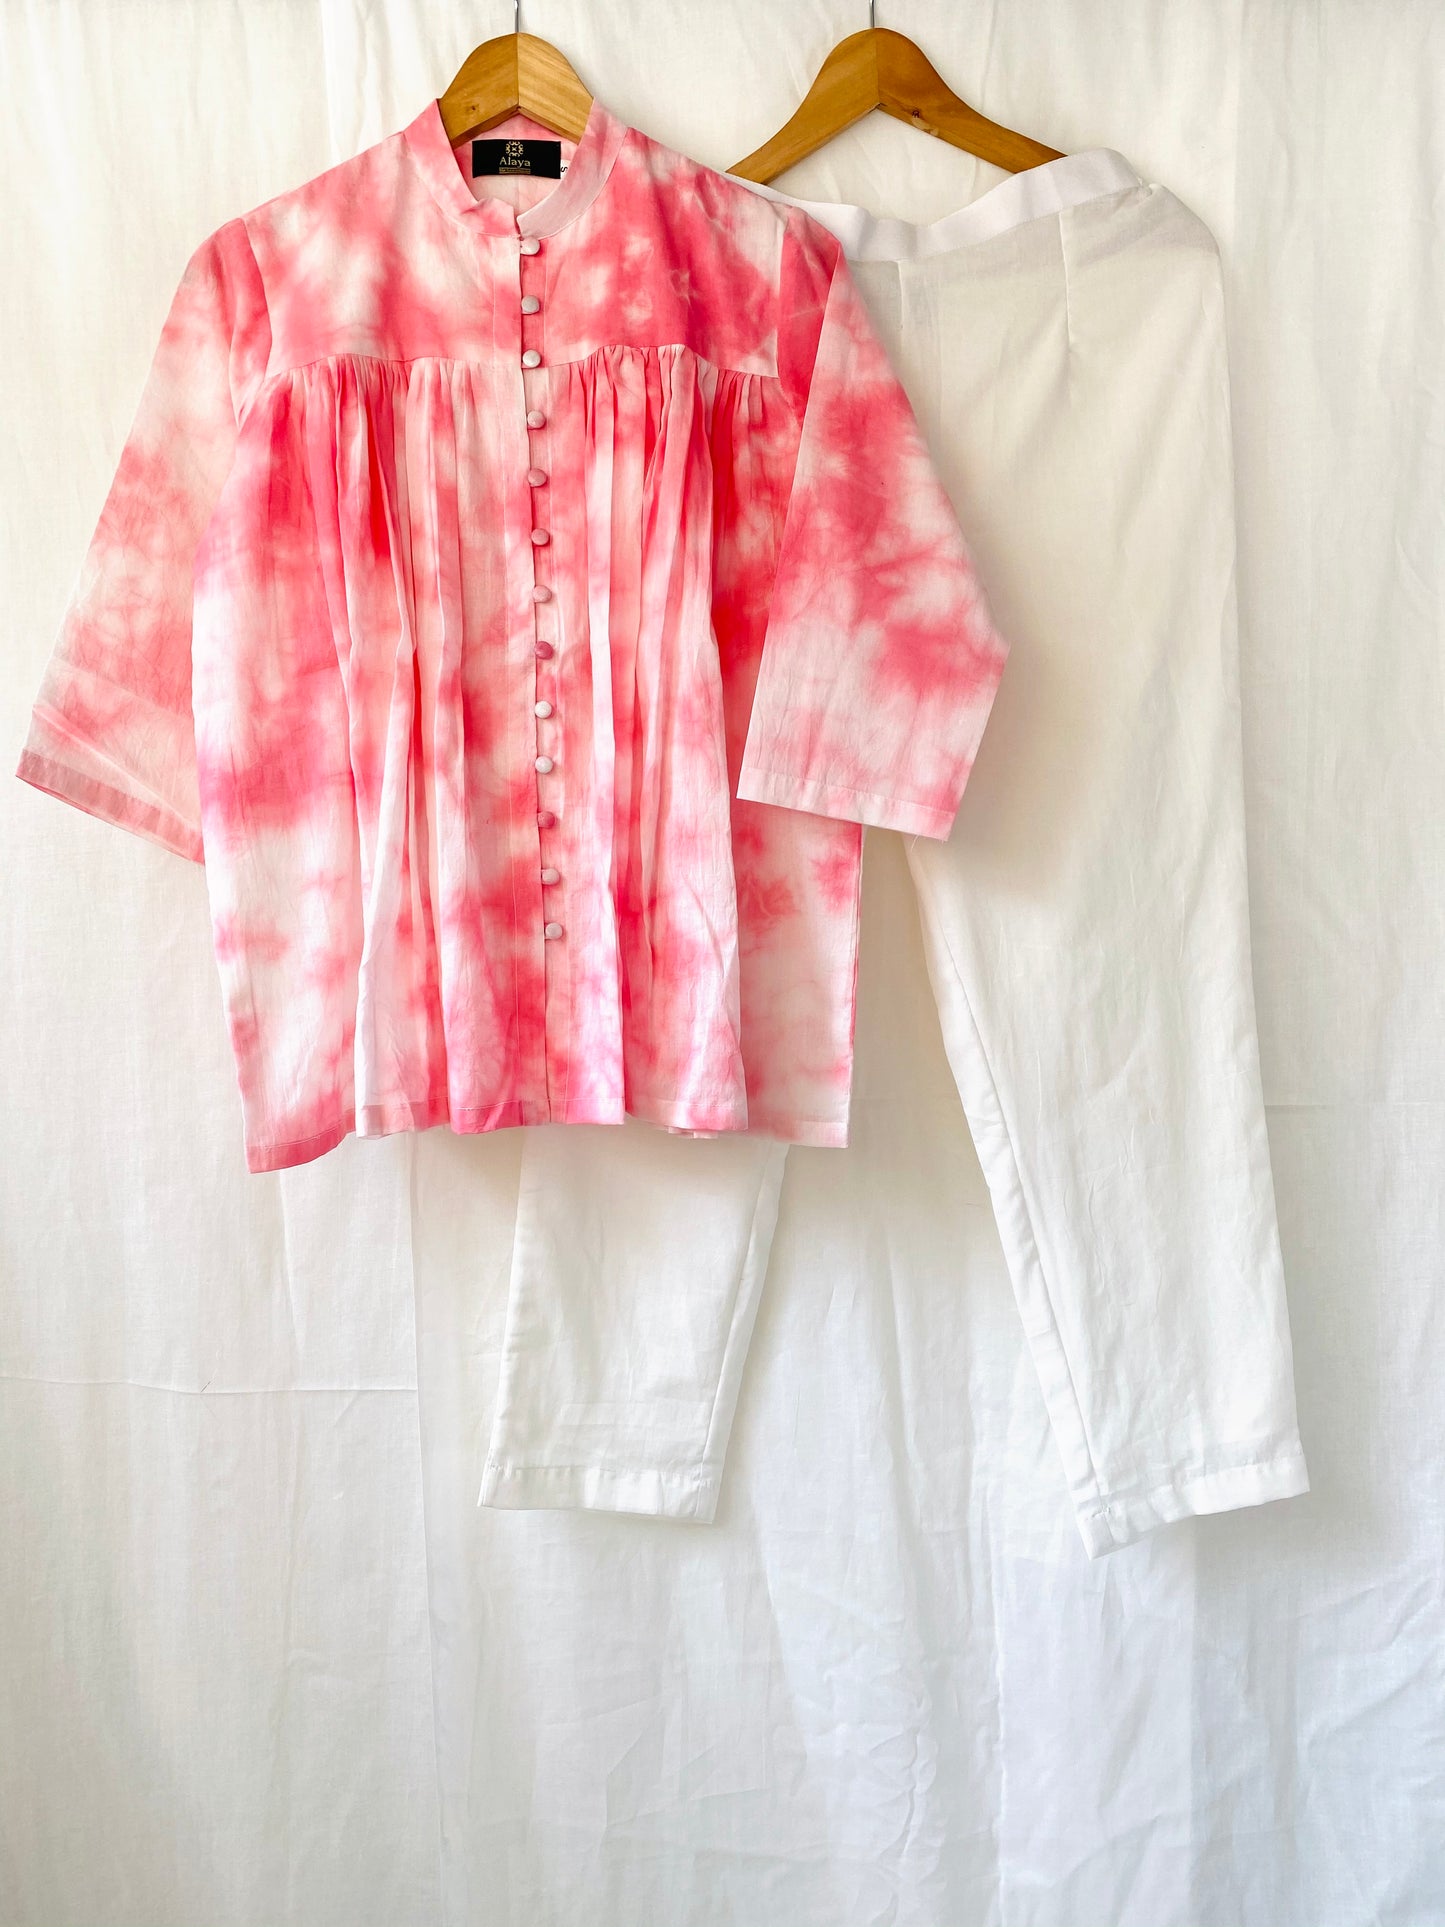 Pink Tie Dye Top with solid White Pants